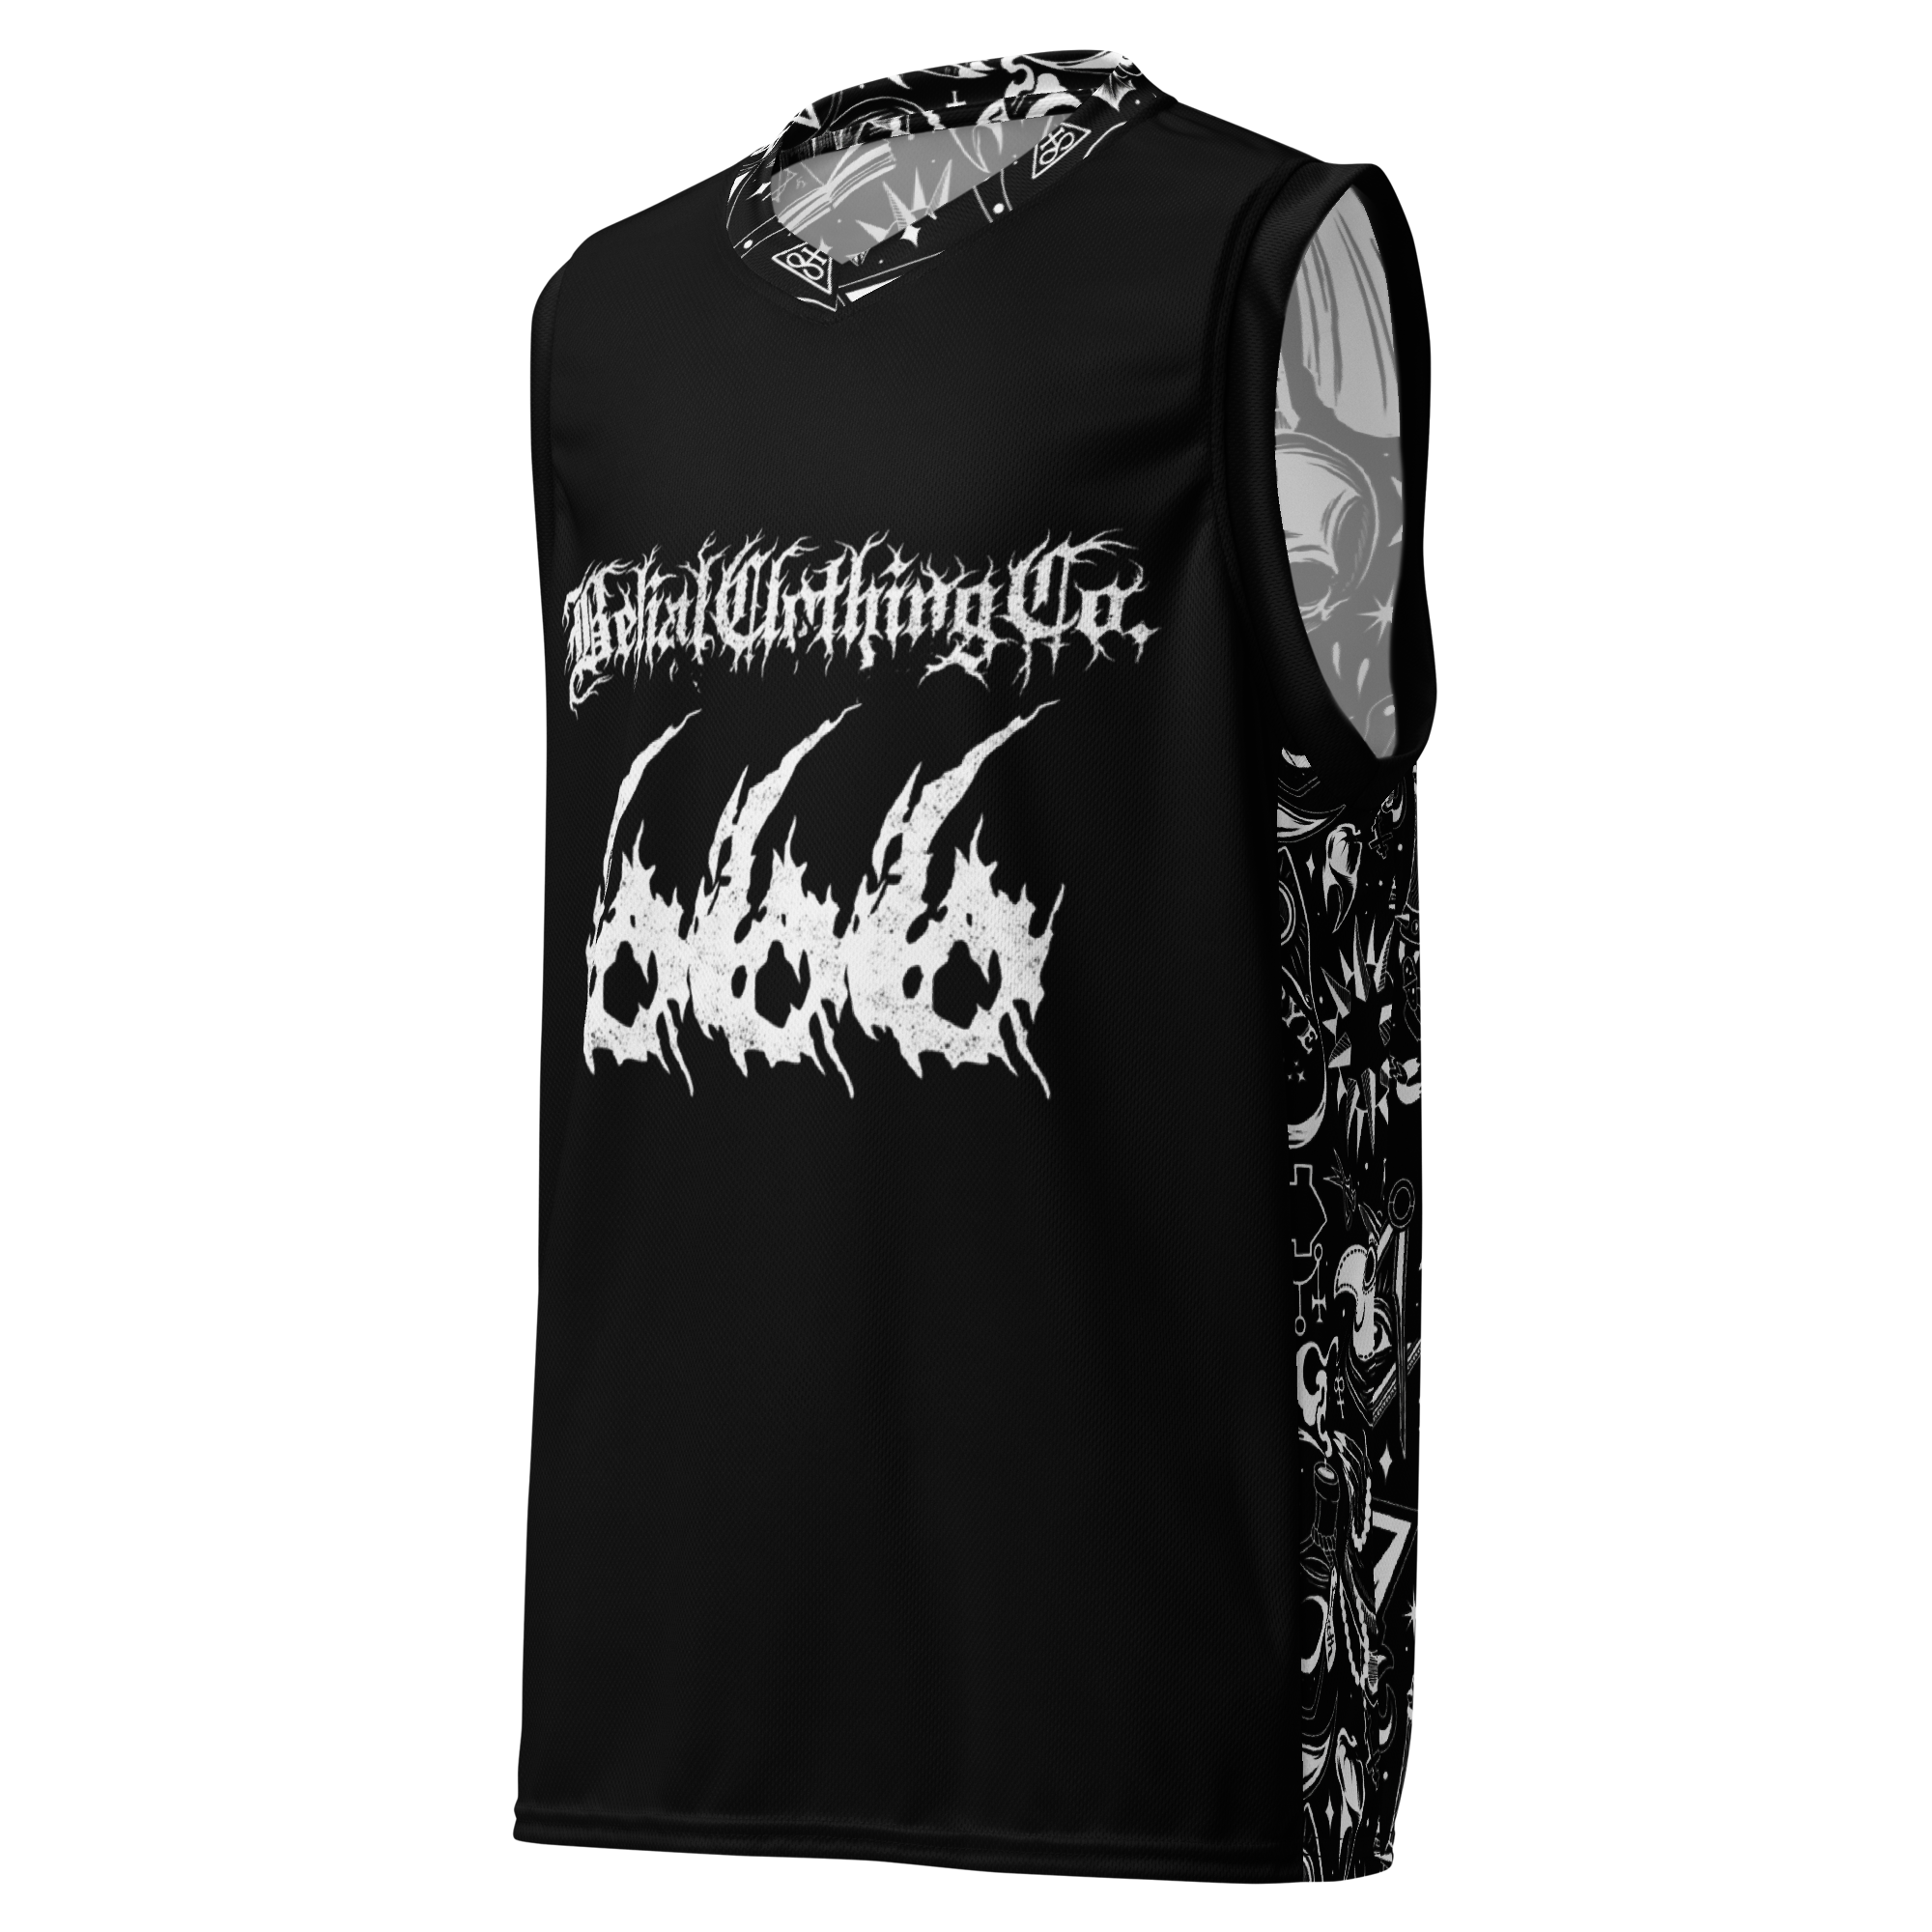 The Satanist Recycled unisex basketball jersey